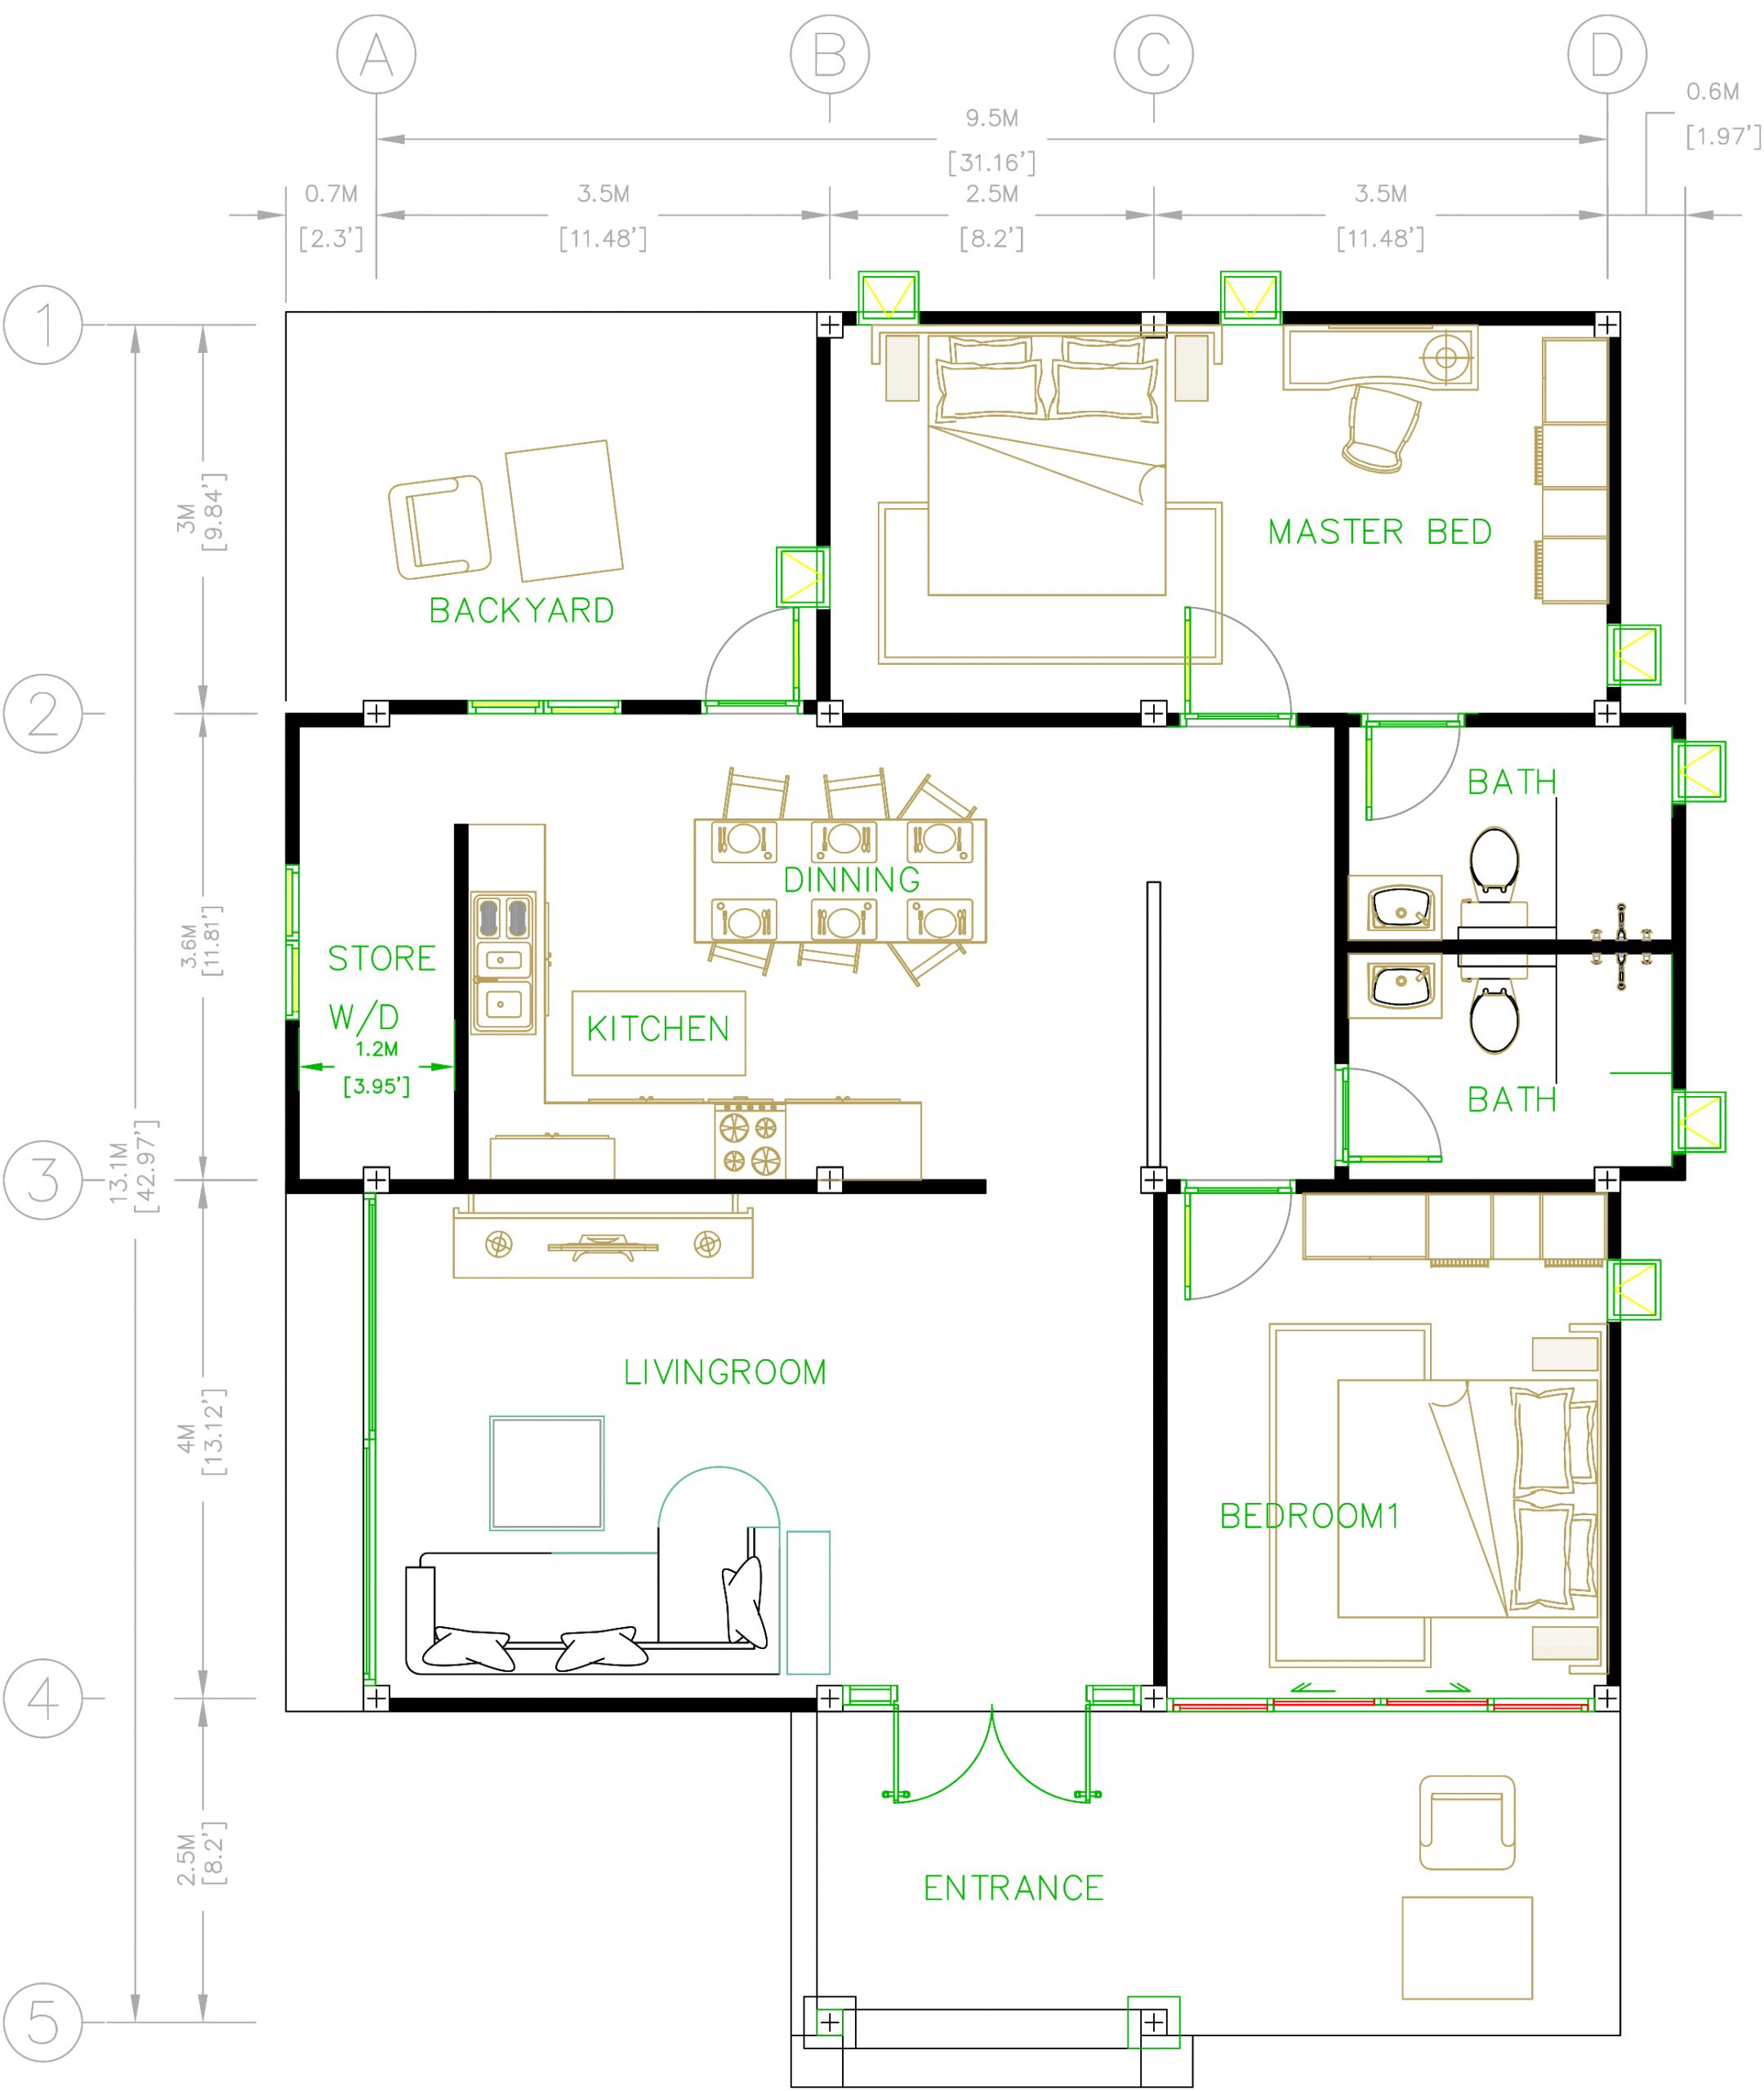 Bungalow House Plans 31x43 Feet 9x13.5 Meters 2 Beds House layout floor plan